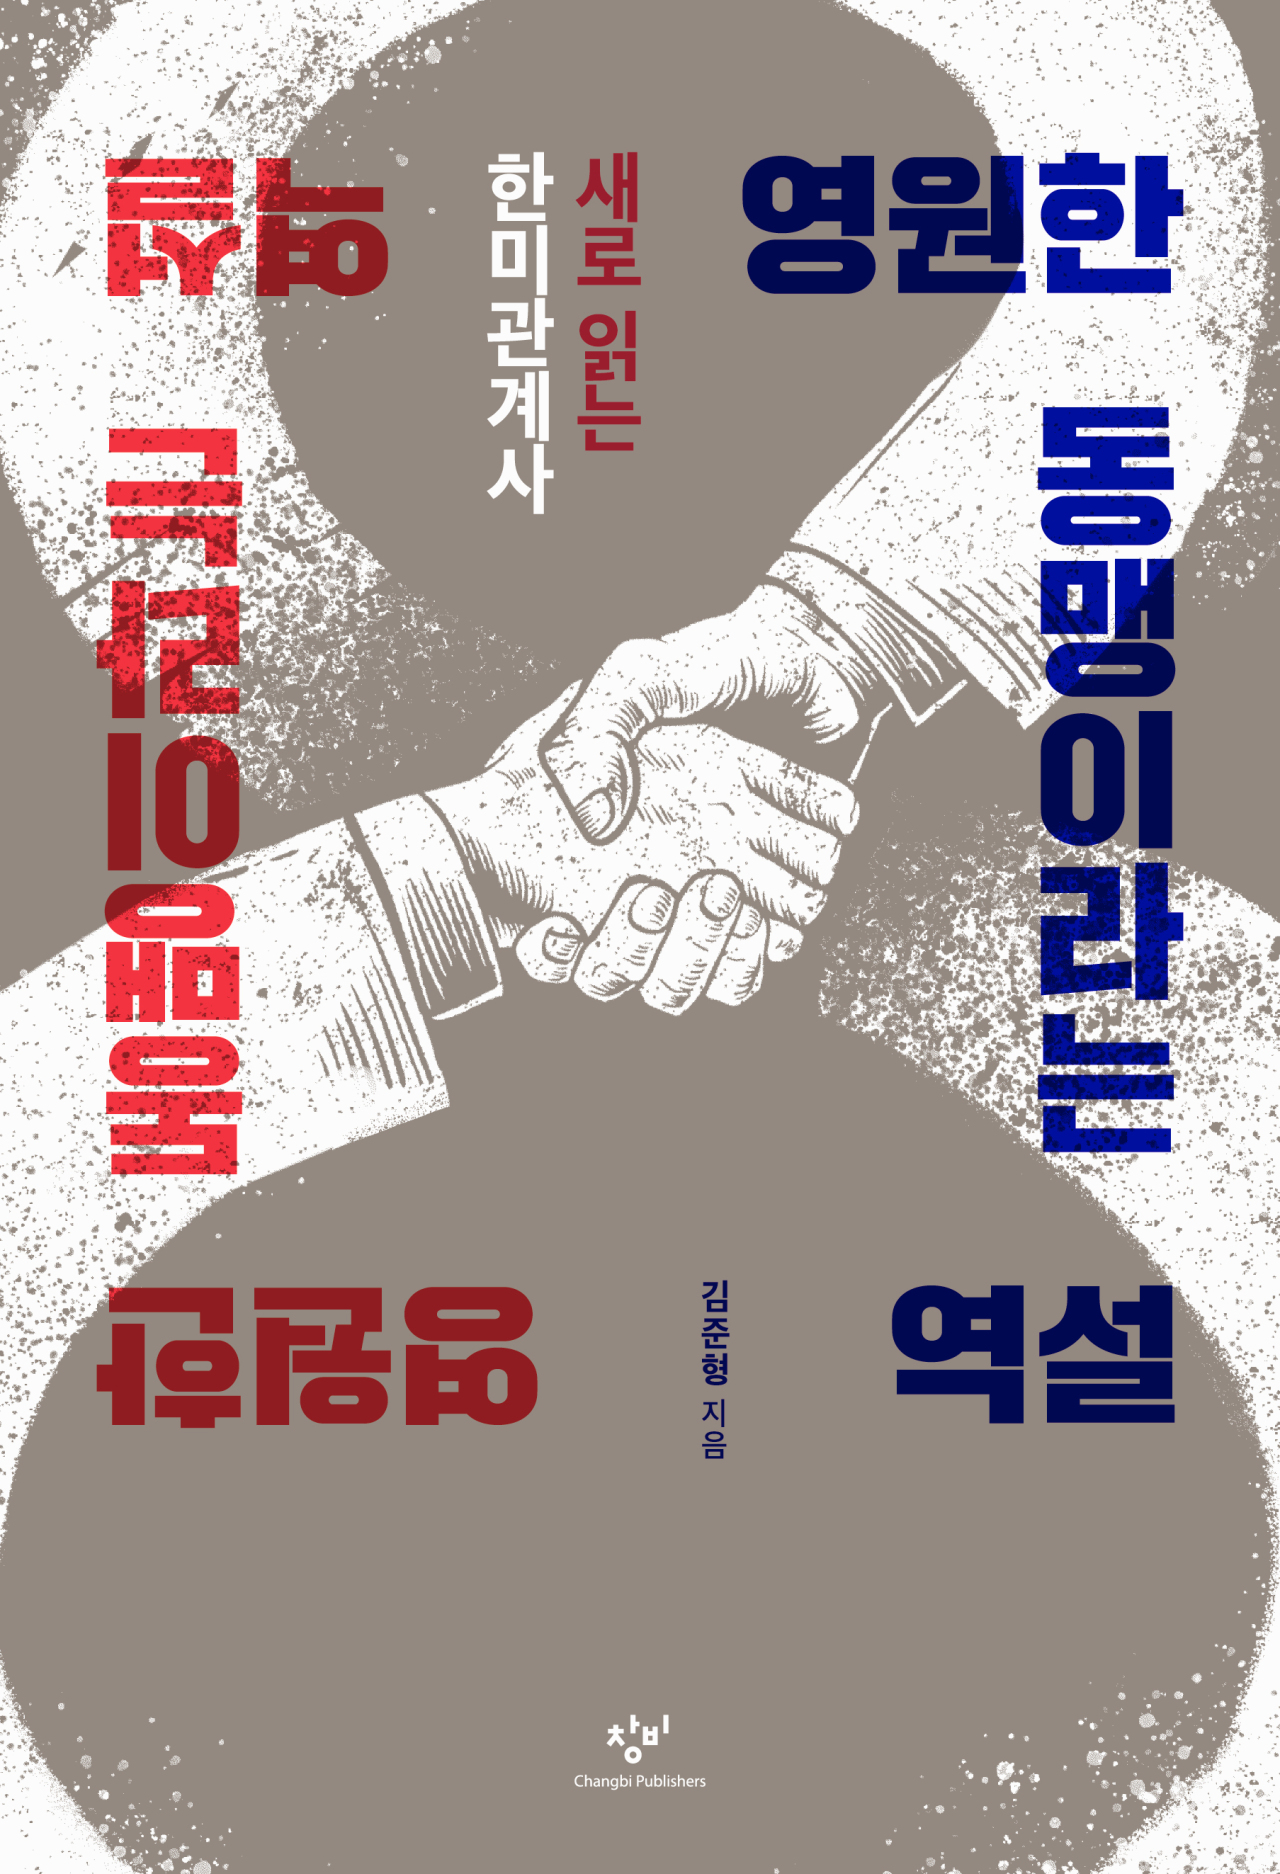 “The Paradox of the Eternal Alliance” by Kim Joon-hyung (Changbi Publishers)